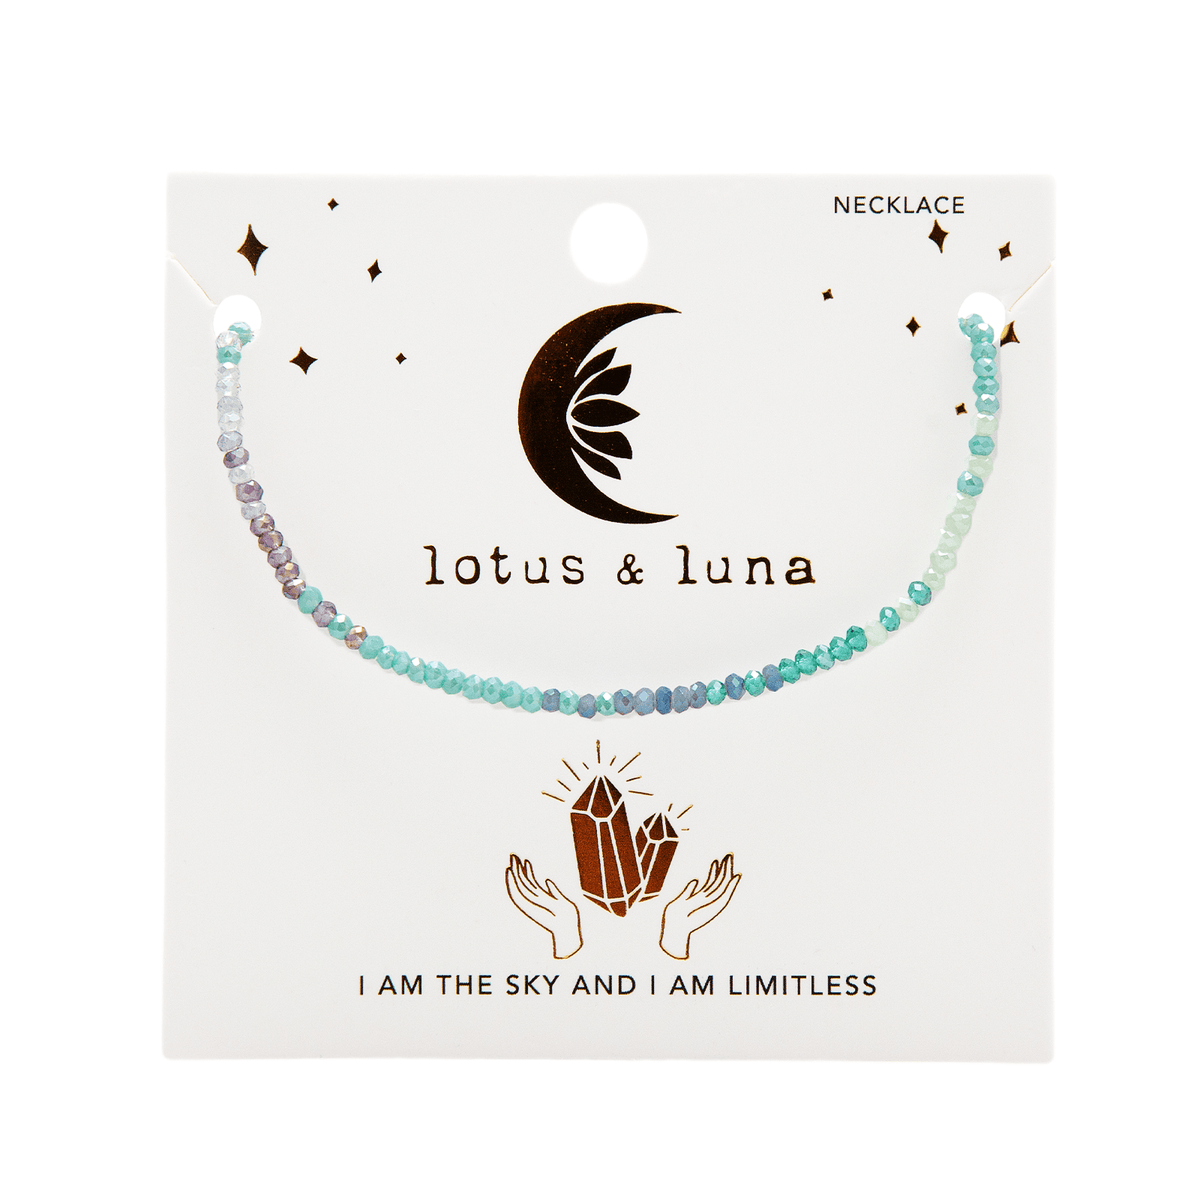 Teal, blue and purple stone goddess necklace on packaging